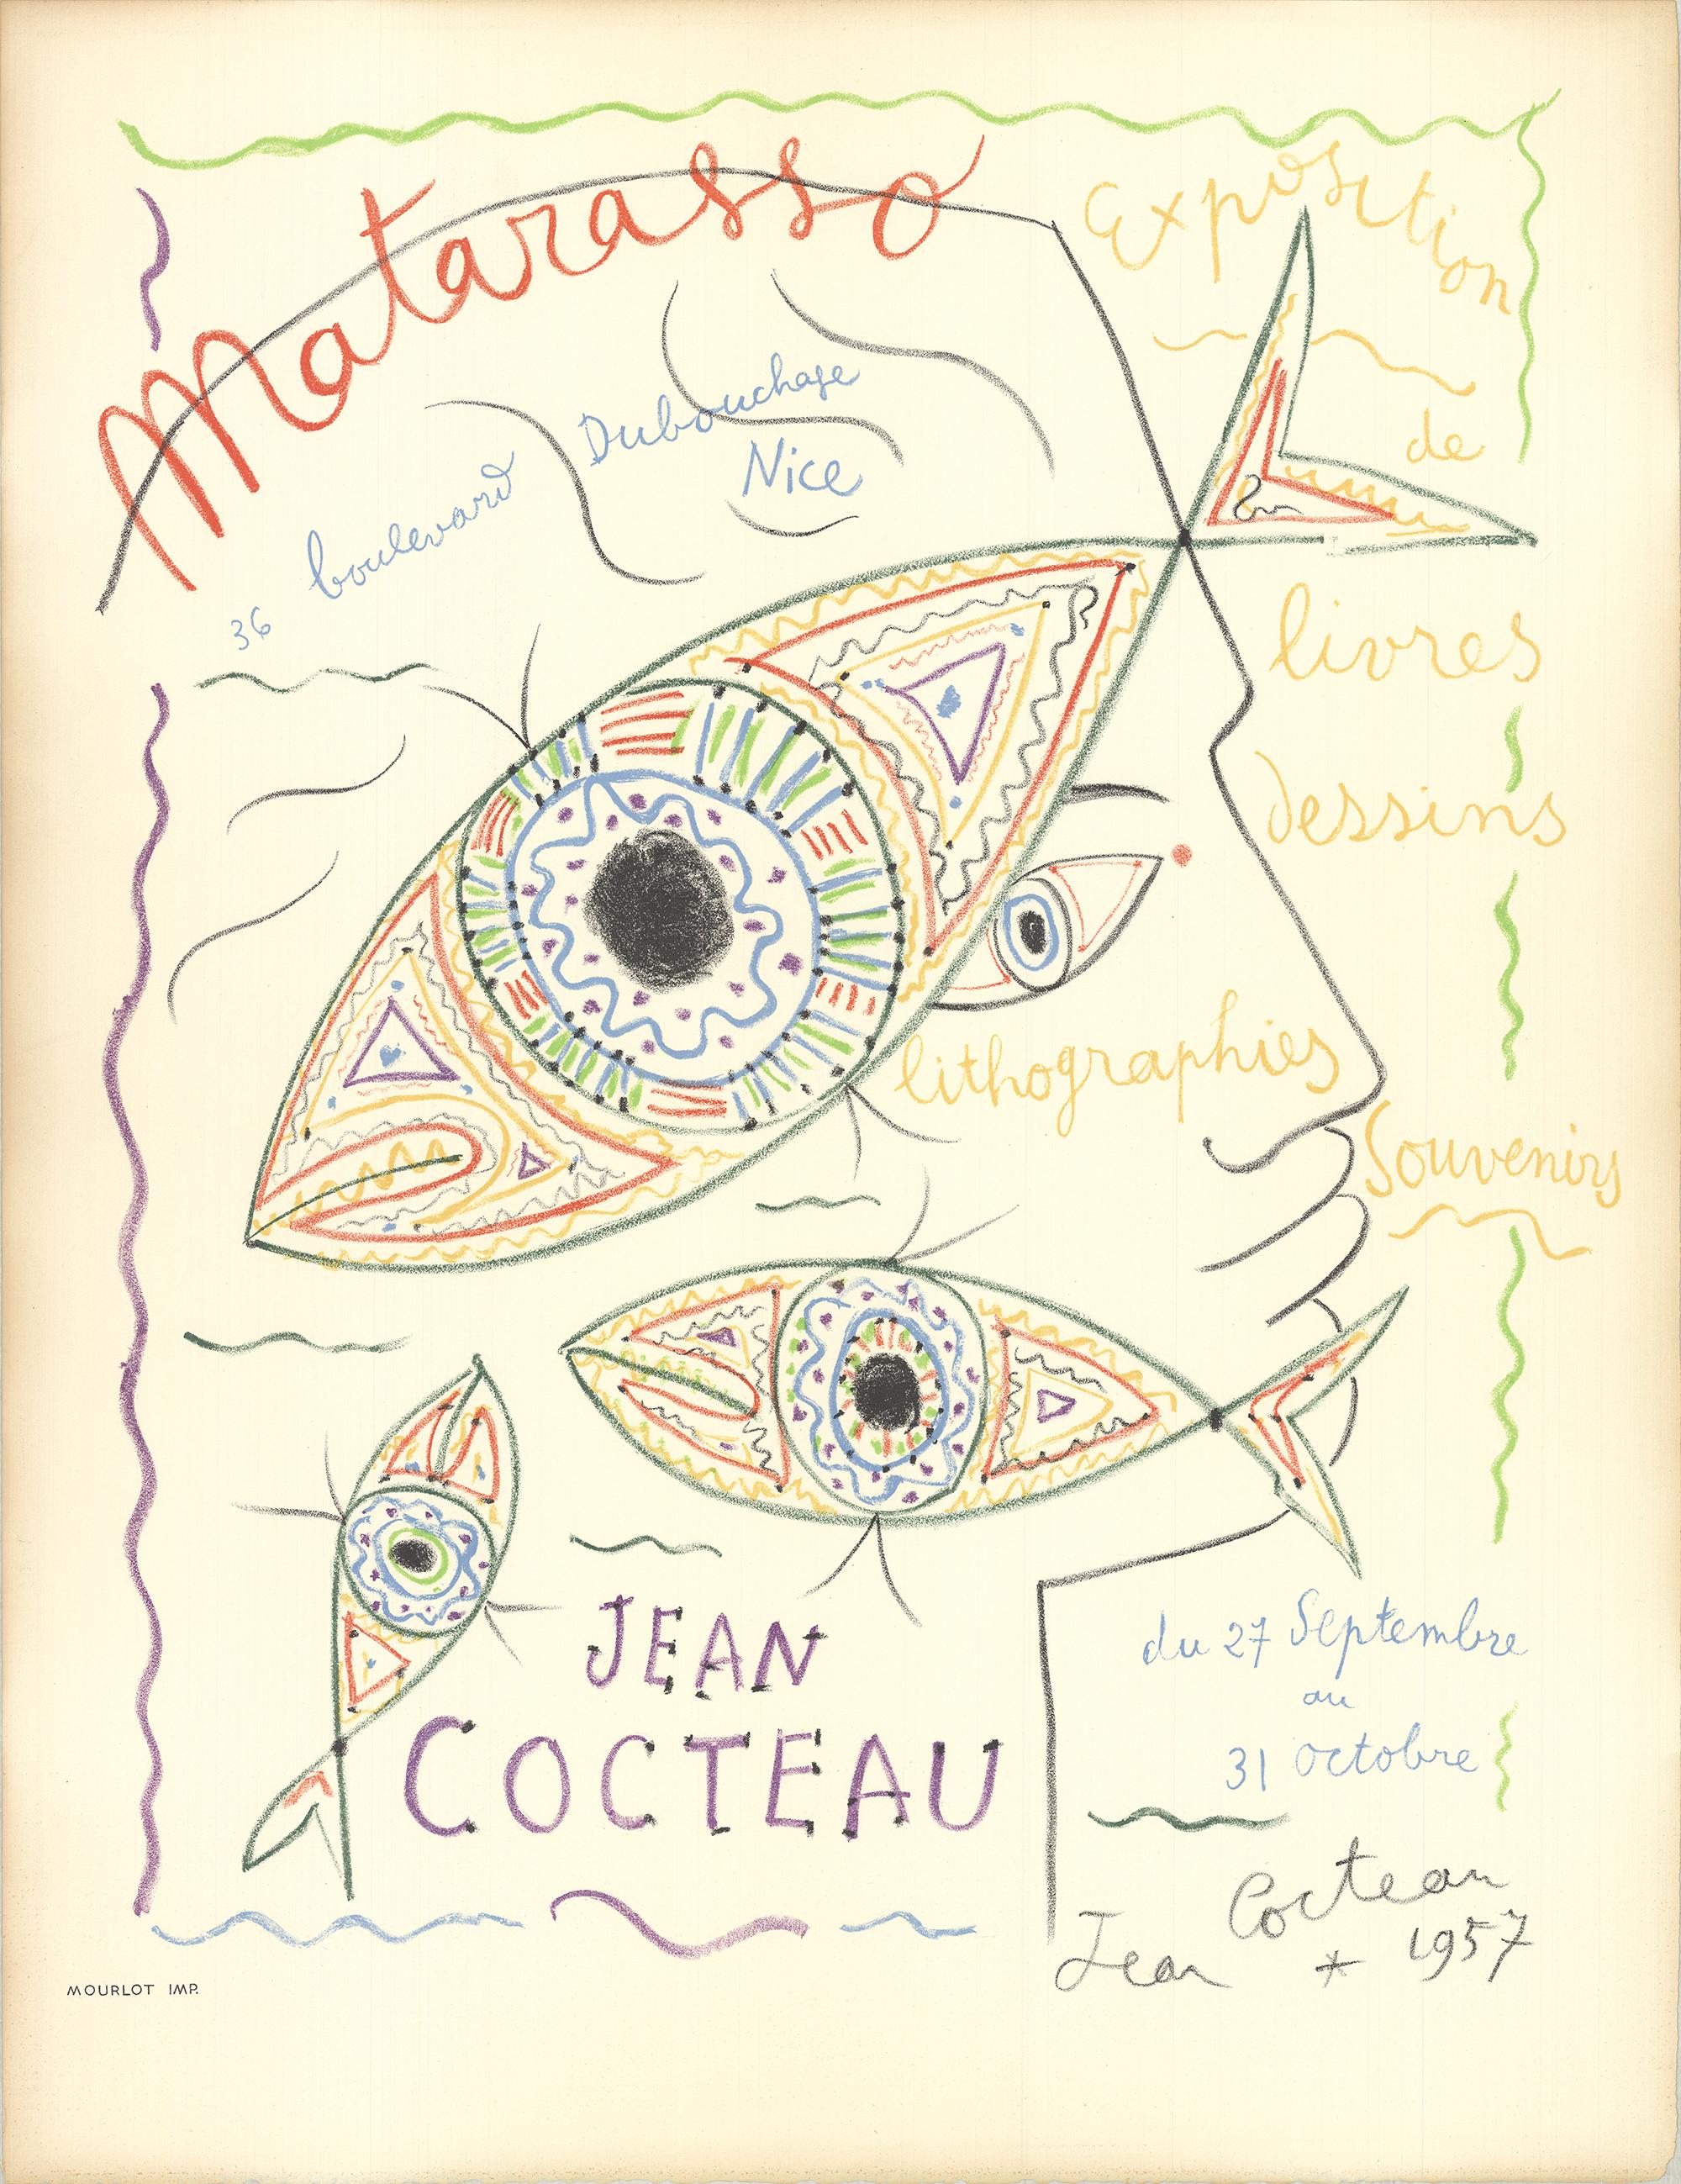 Original Vintage European Movie Show Lithograph by Cocteau. Printed on Arches paper by Mourlot printers in 1957. Beautiful and vivid colors. Very rare Measures 19 x 24.75 inches text on the poster is Exposition de livres, dessins, lithographies,